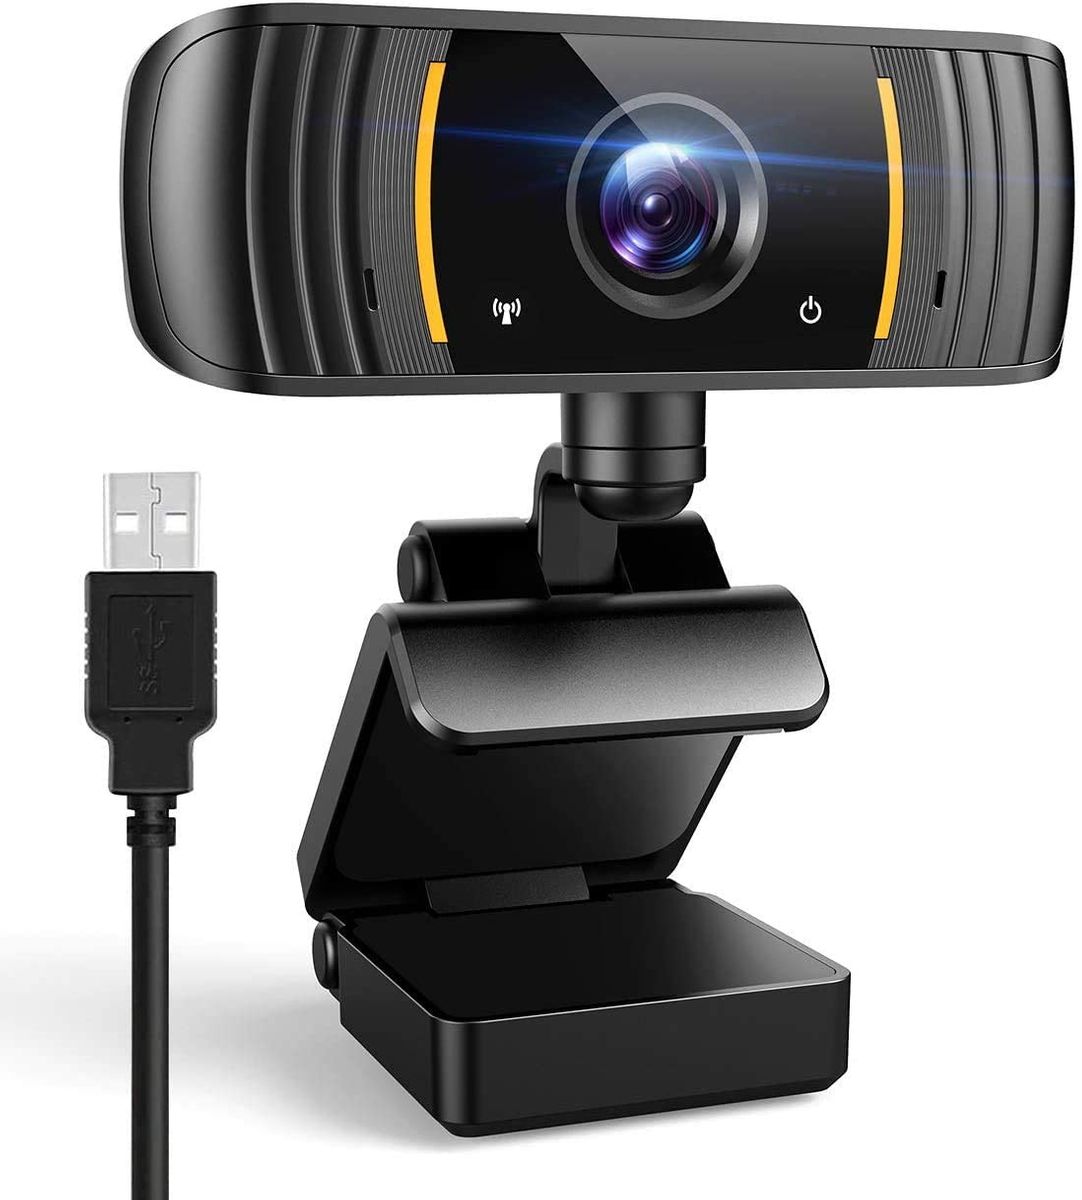 ansinna Webcam 2K with Microphone, 1440P Full HD PC Camera with Exposure Compensation, 110° Field of View, Plug and Play USB Webcam